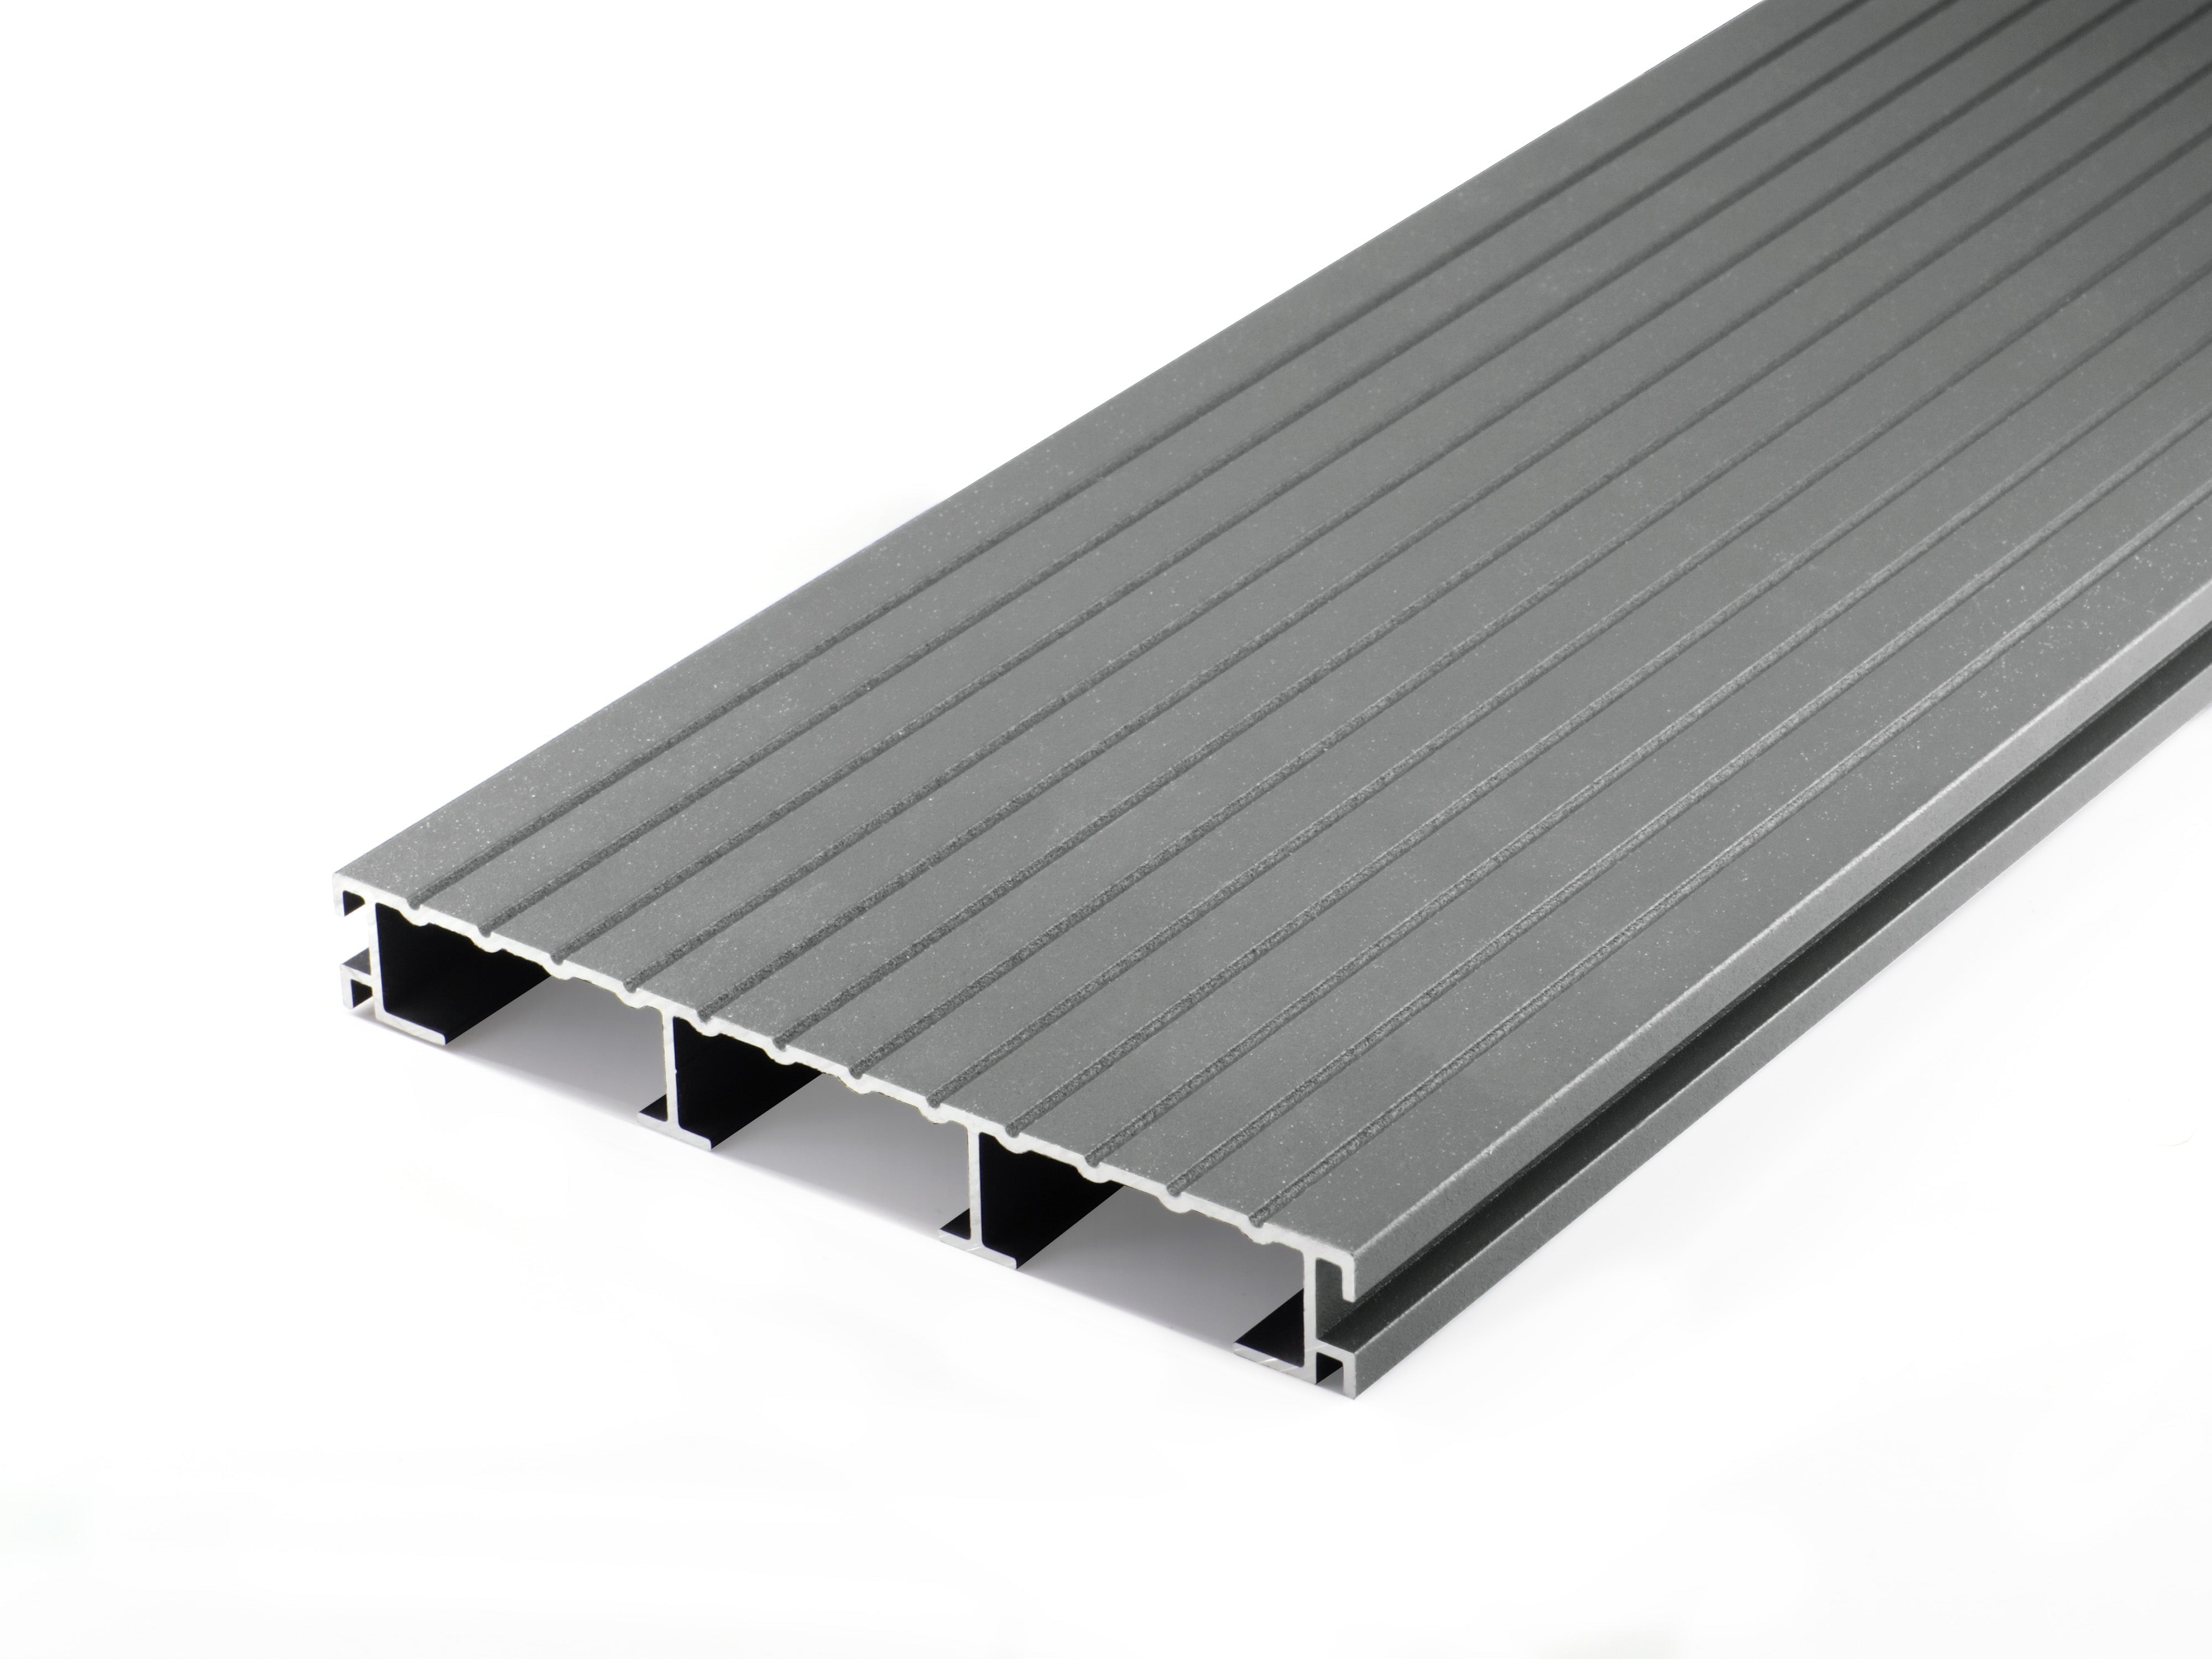 Non-combustible Aluminium Decking Board | RAL 7037 Dusty Grey | 200mm x 25mm x 3.2m